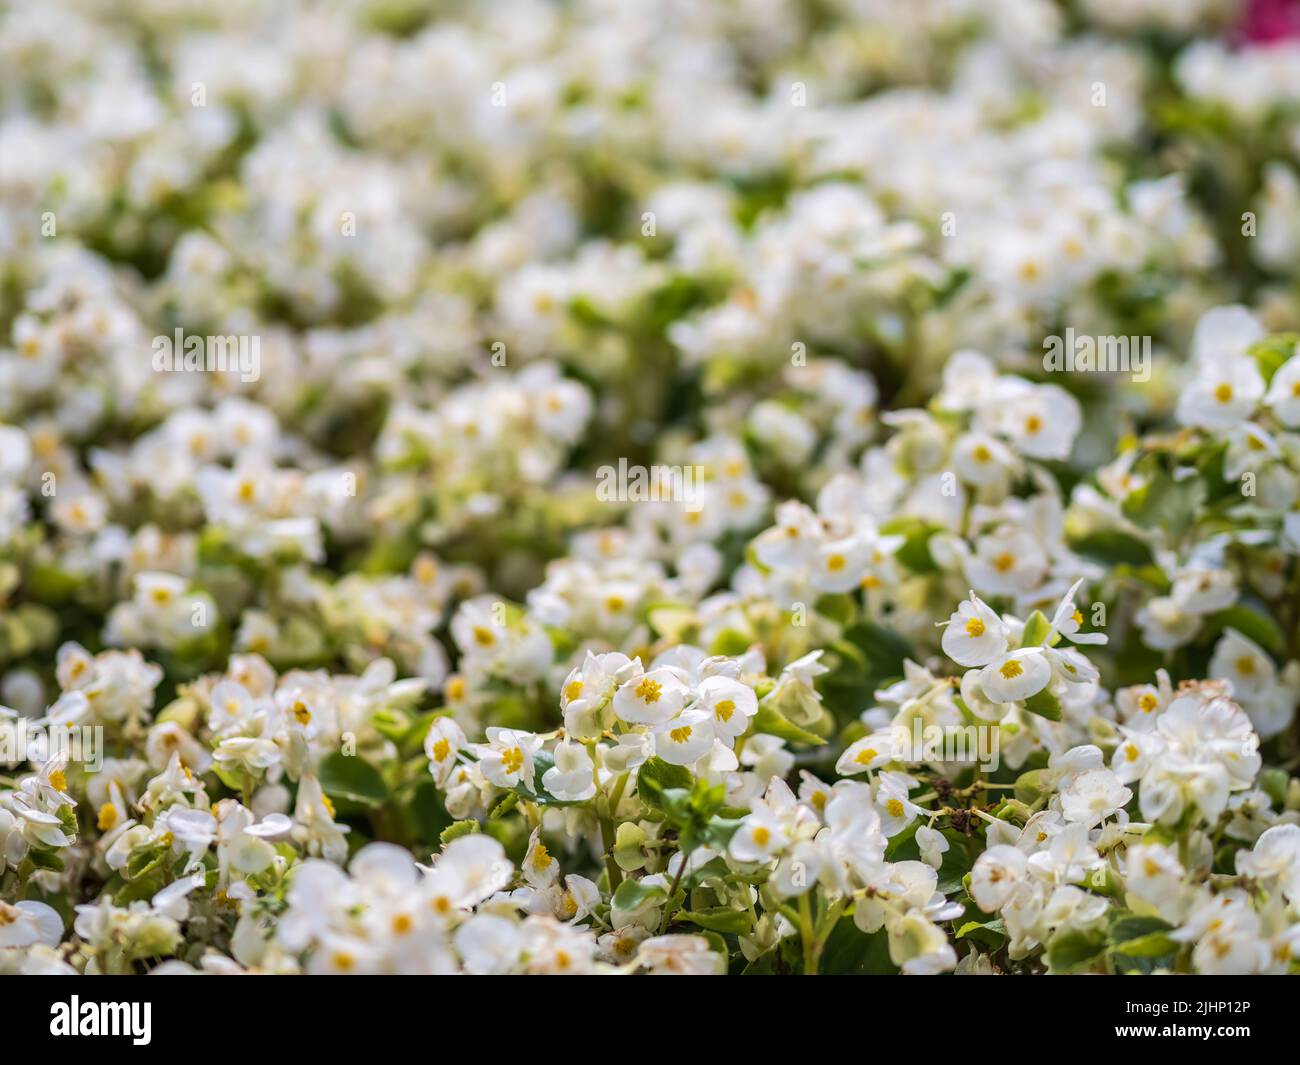 White begonia everblooming Ambassador in a flower bed on the street. Beautiful, fresh, bright white begonia flowers Stock Photo